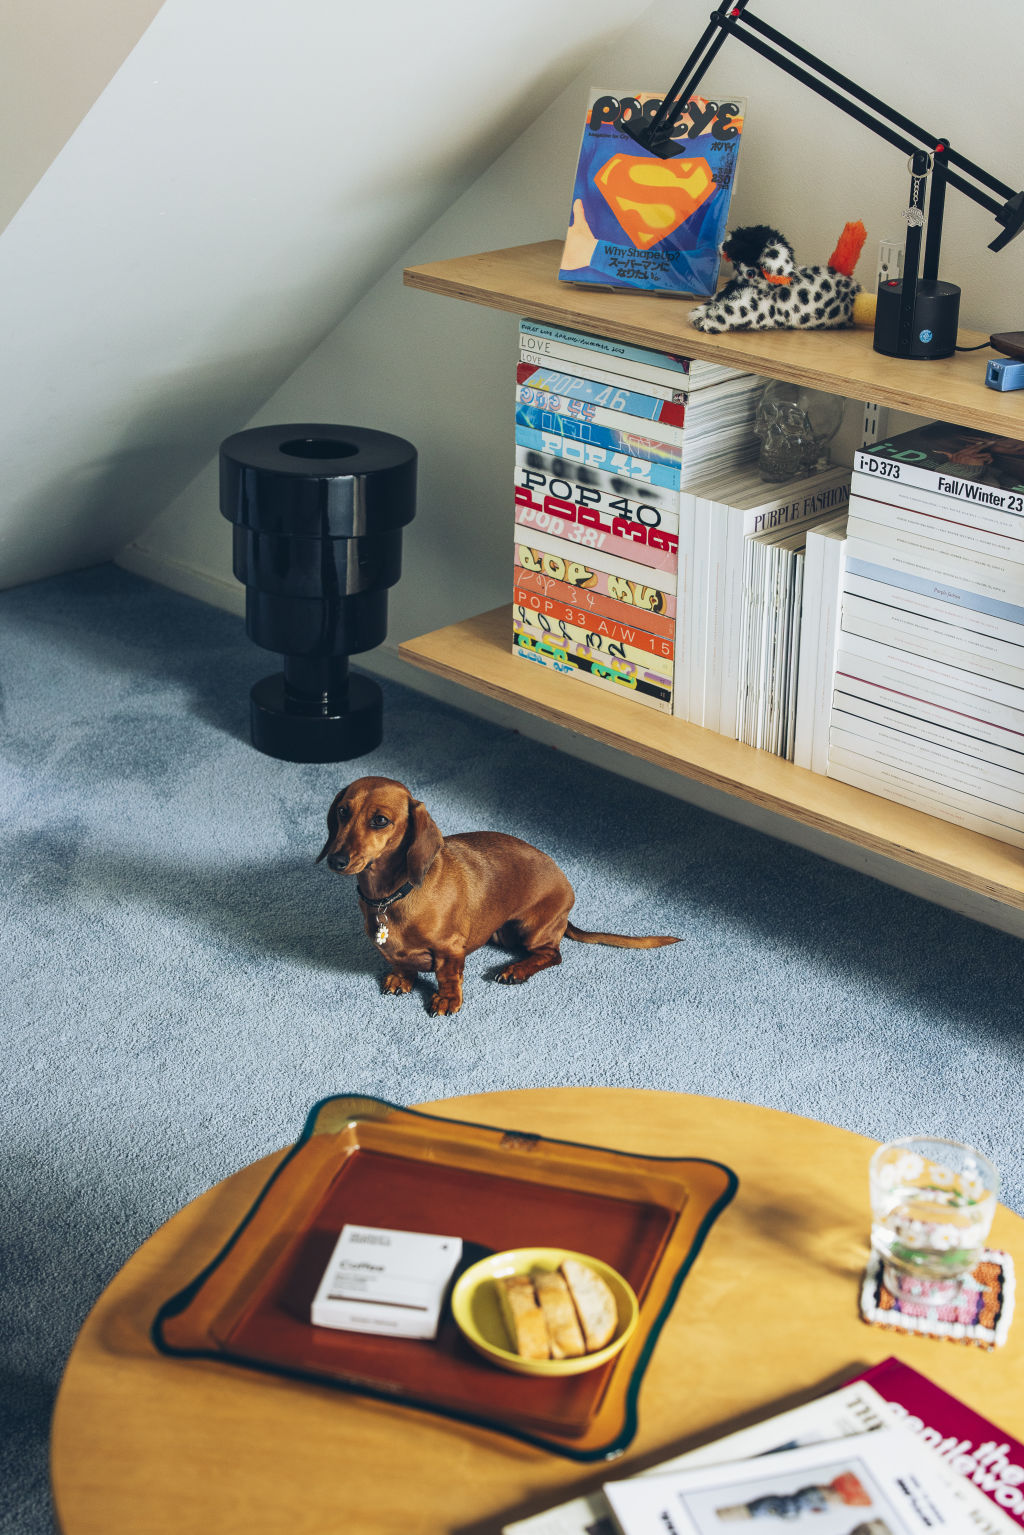 The couple share the home with daughter Valentina, son Enzo, and dog Slinky. Photo: Hilary Walker